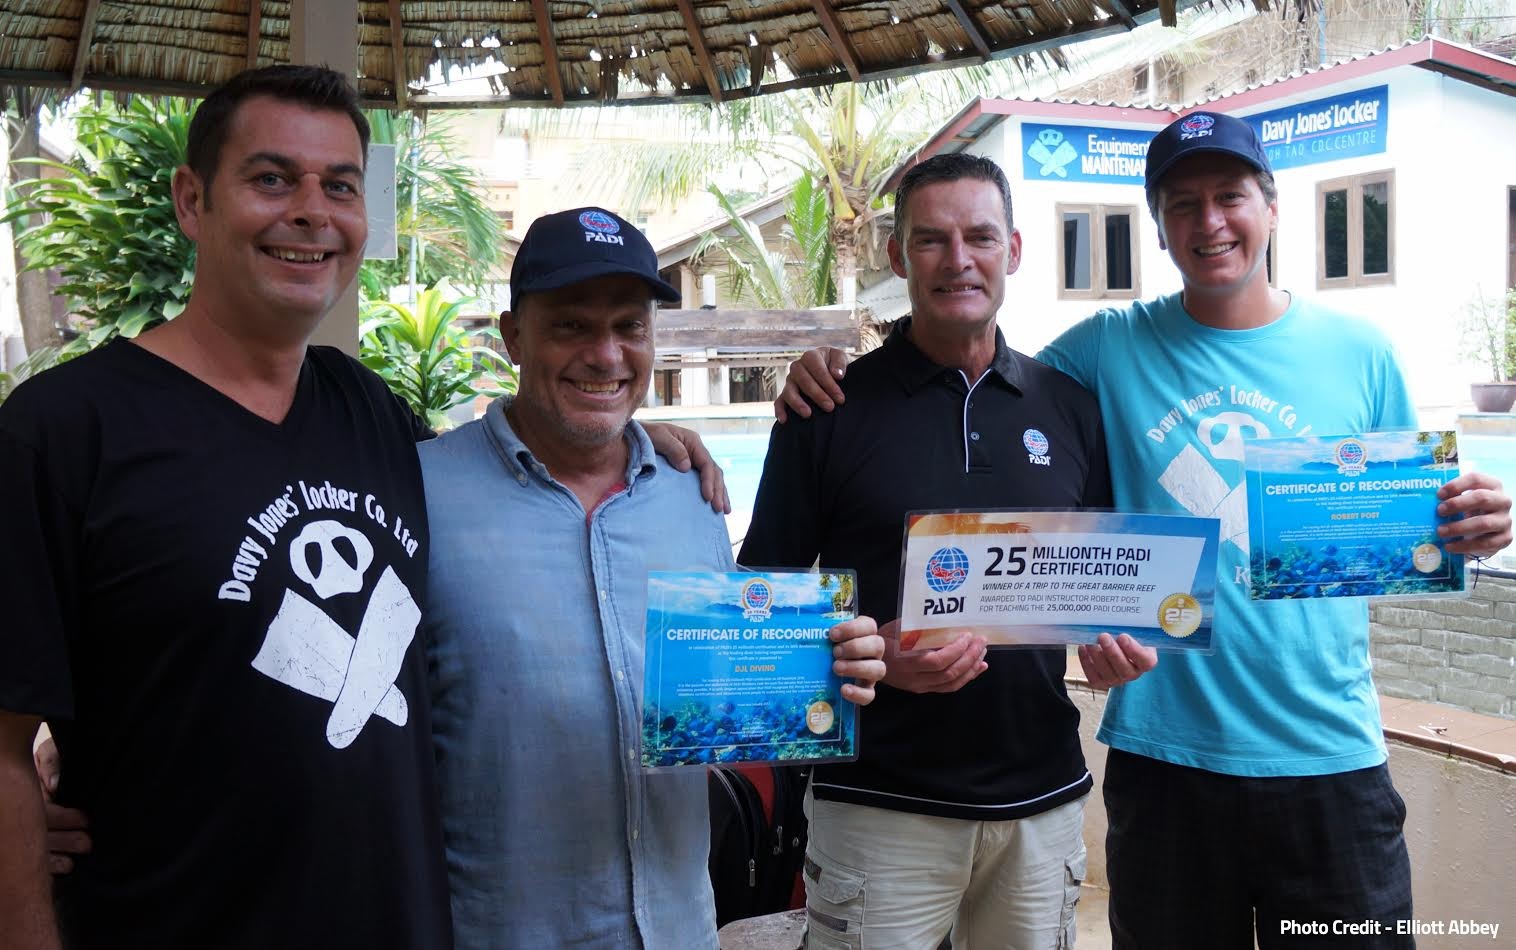 Master Scuba Diver Trainer Bobby Post certified the 25 millionth PADI Open Water Diver.